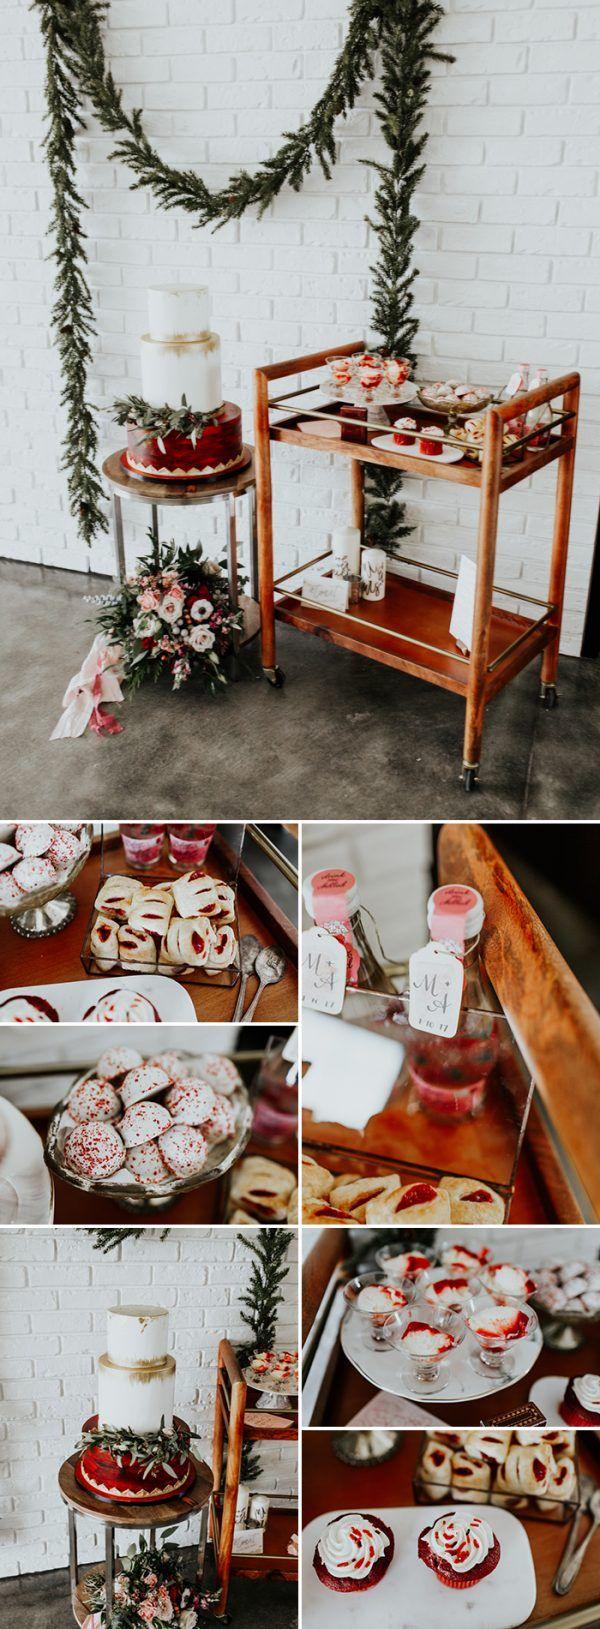 Wedding - Fall In Love With This Industrial Valentine's Wedding Inspiration